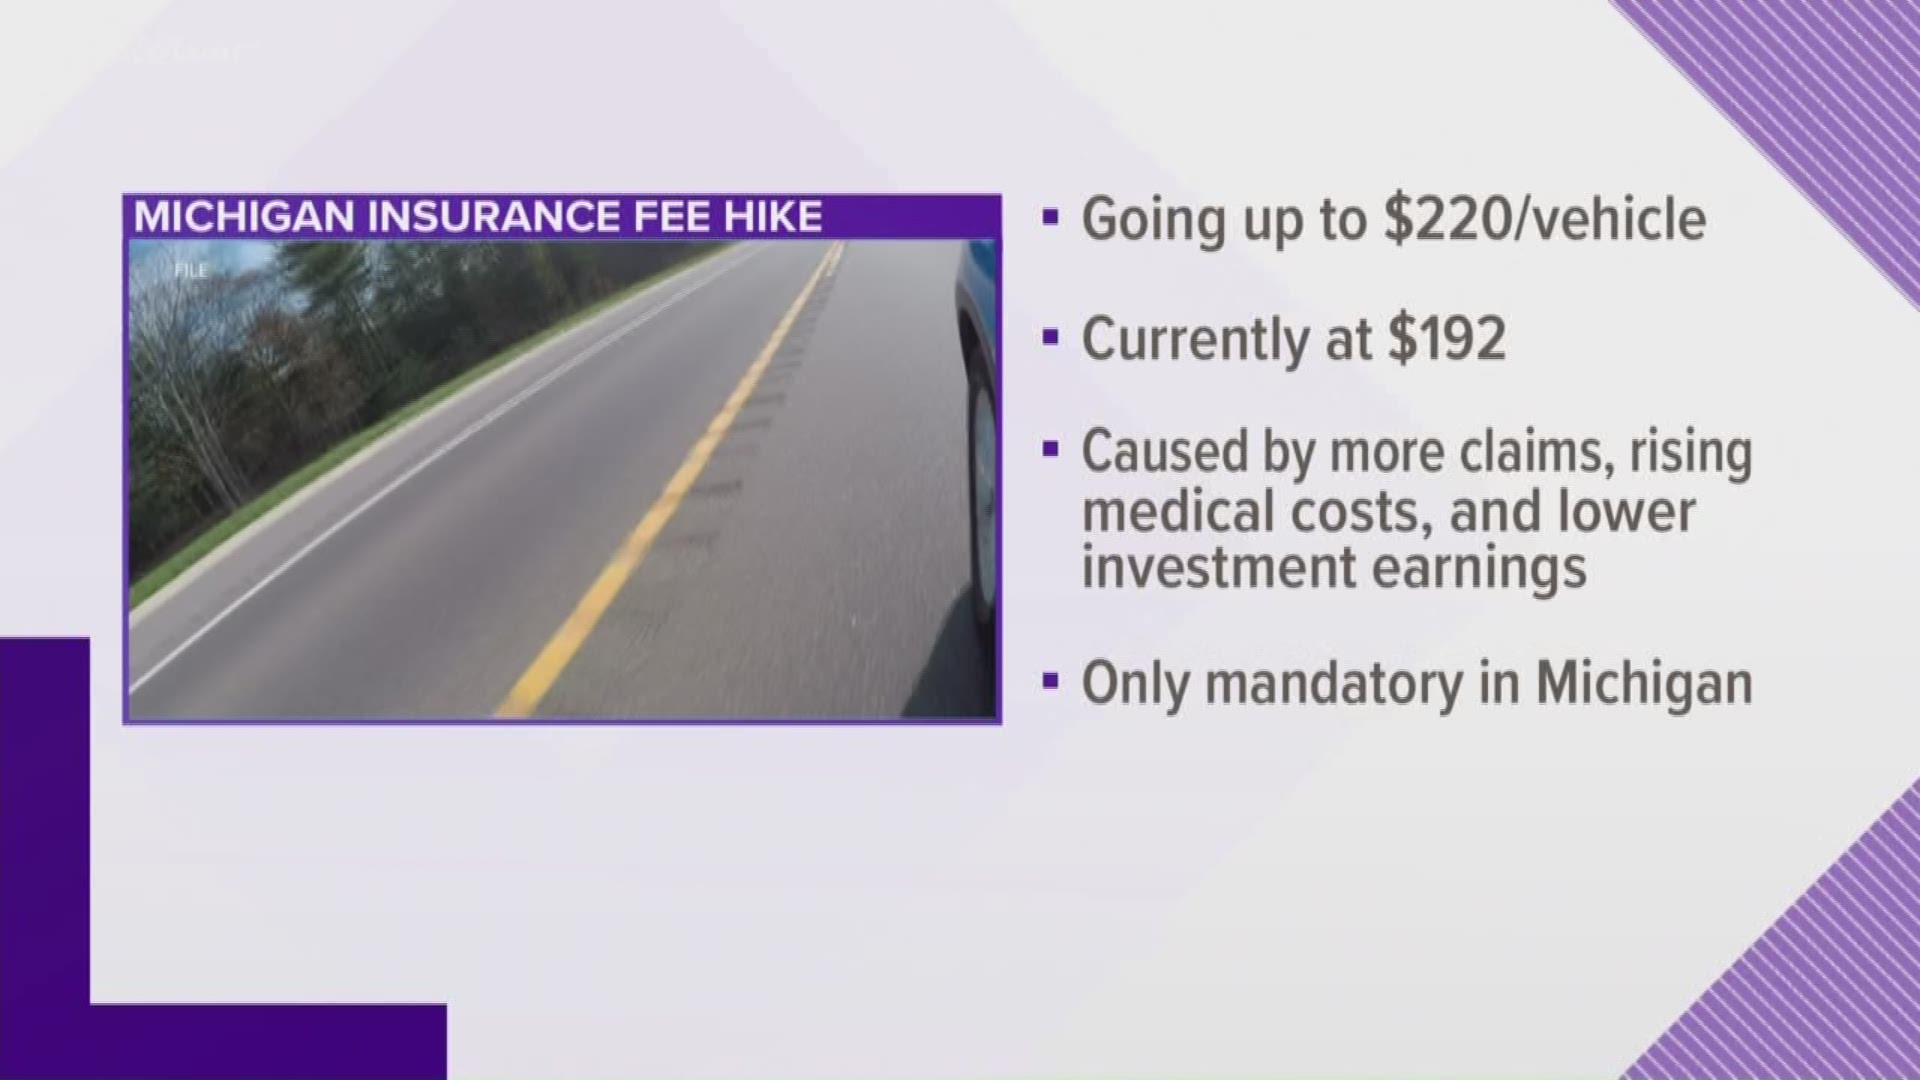 Michigan insurance fee cost going up